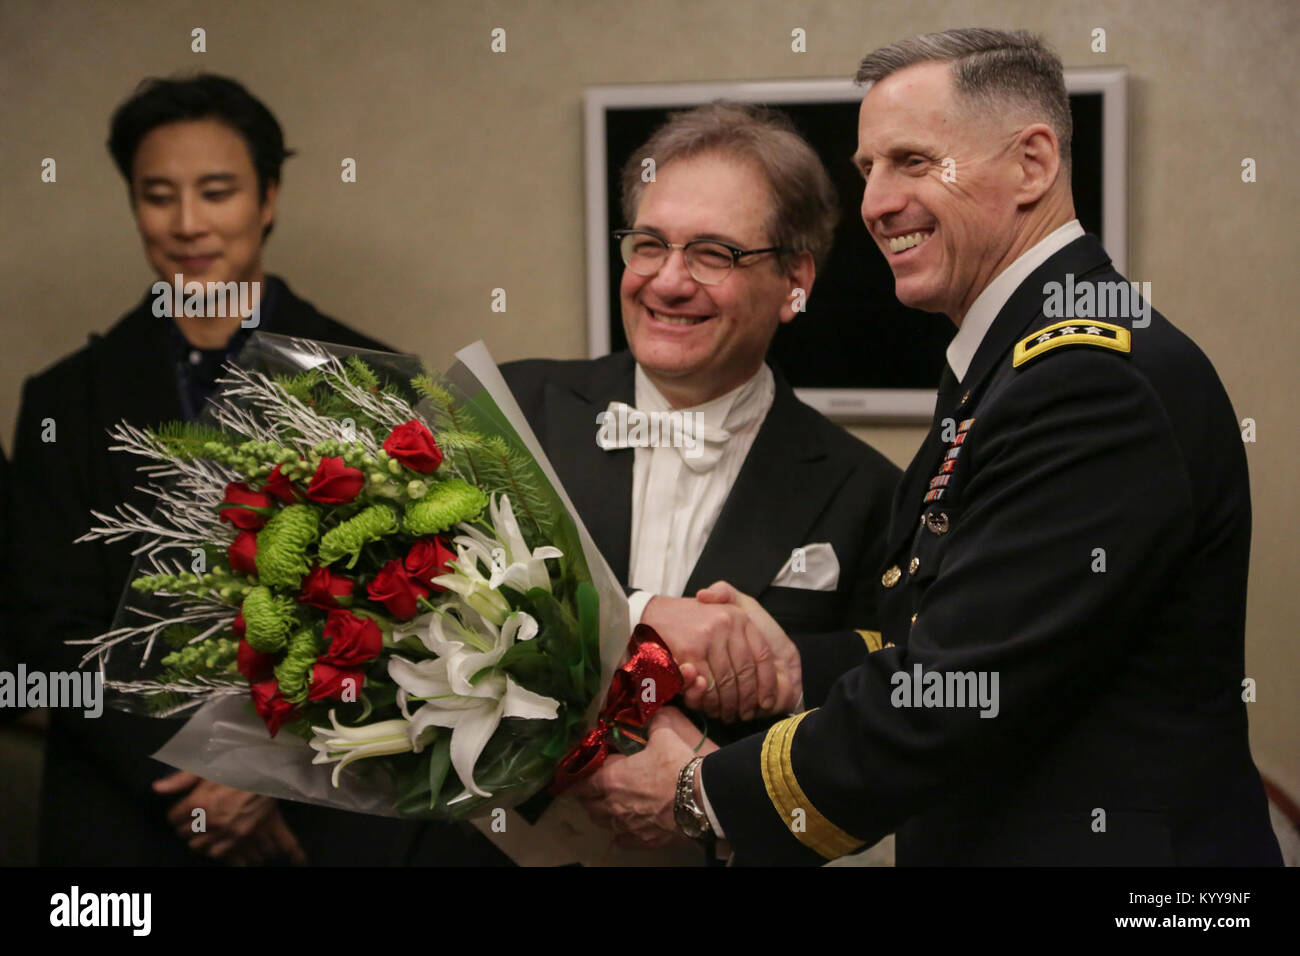 U.S Army Lt. Gen. Thomas S. Vandal commander of the Eighth army, presents flowers to Carl Palleschi after the Holiday concert in Seoul, Korea Dec. 17, 2017. The concert was hosted by the Eighth Army command in conjunction with local community leaders during the holiday season to promote harmonious relations between the U.S. Army and the Republic of Korea (ROK). Over 1500 U.S. Soldiers and ROK soldiers attended performances by the Eighth Army Band and the Prime Philharmonic Orchestra . (U.S. Army Stock Photo